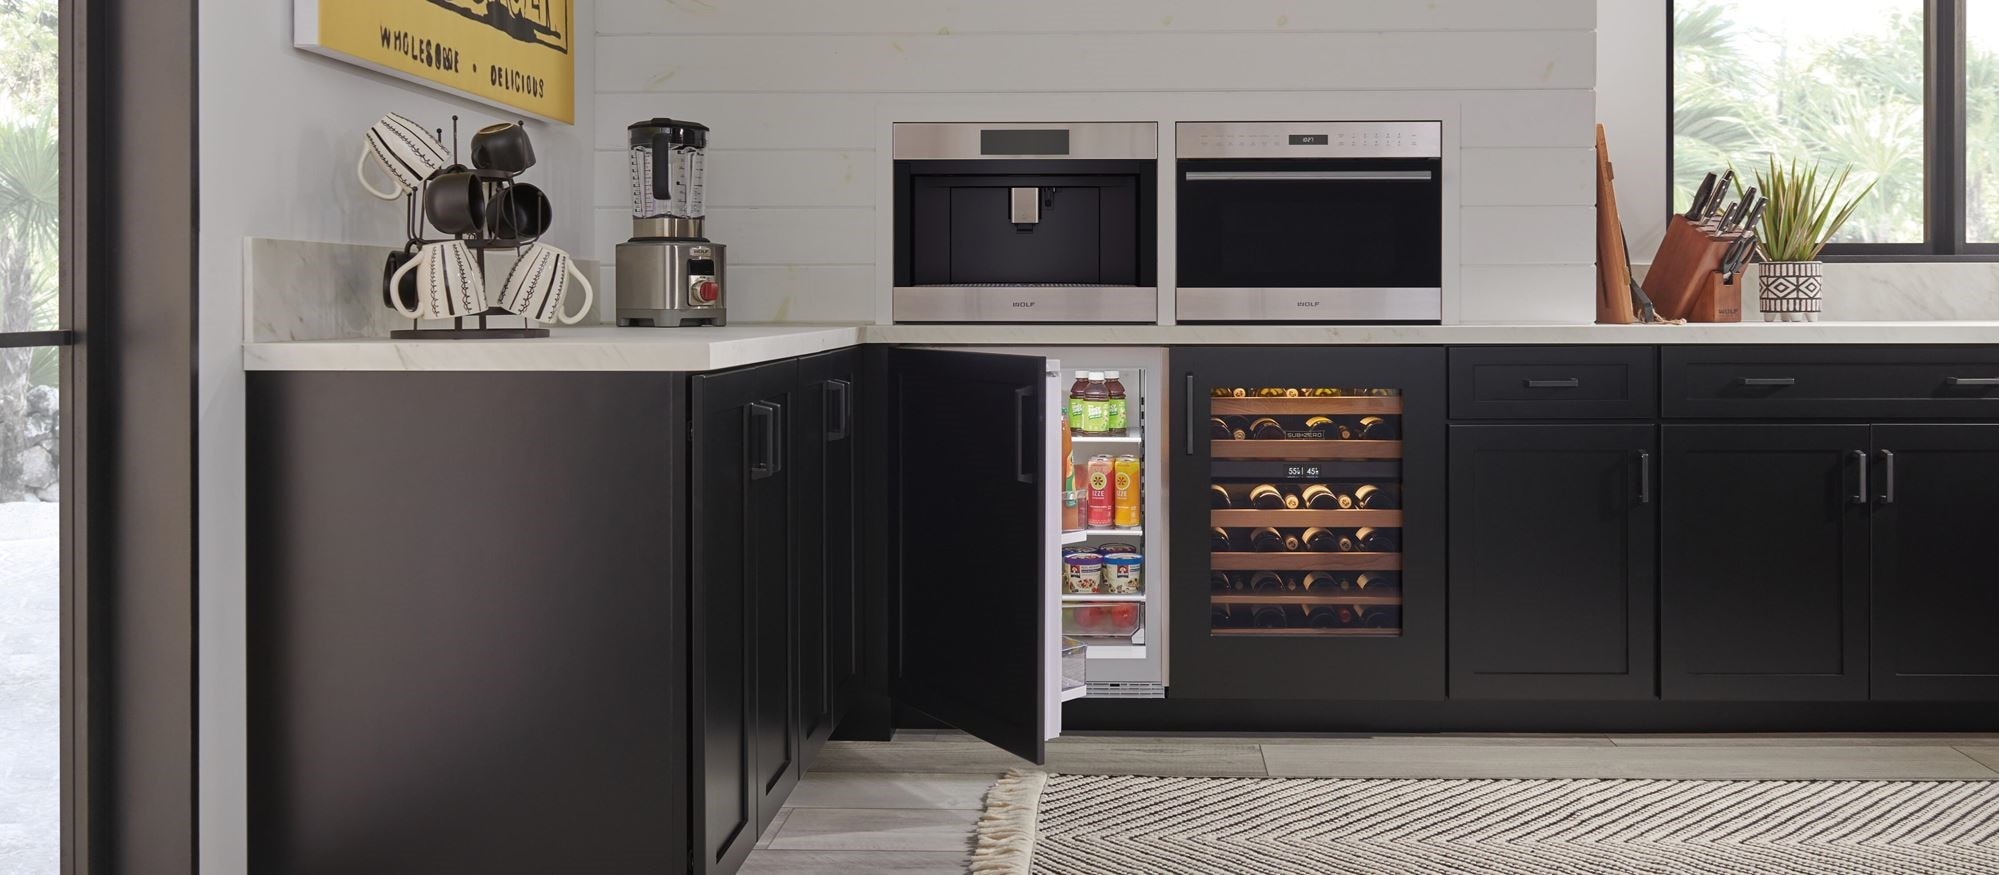 All-In-One Kitchenettes & Microwave-Refrigerators